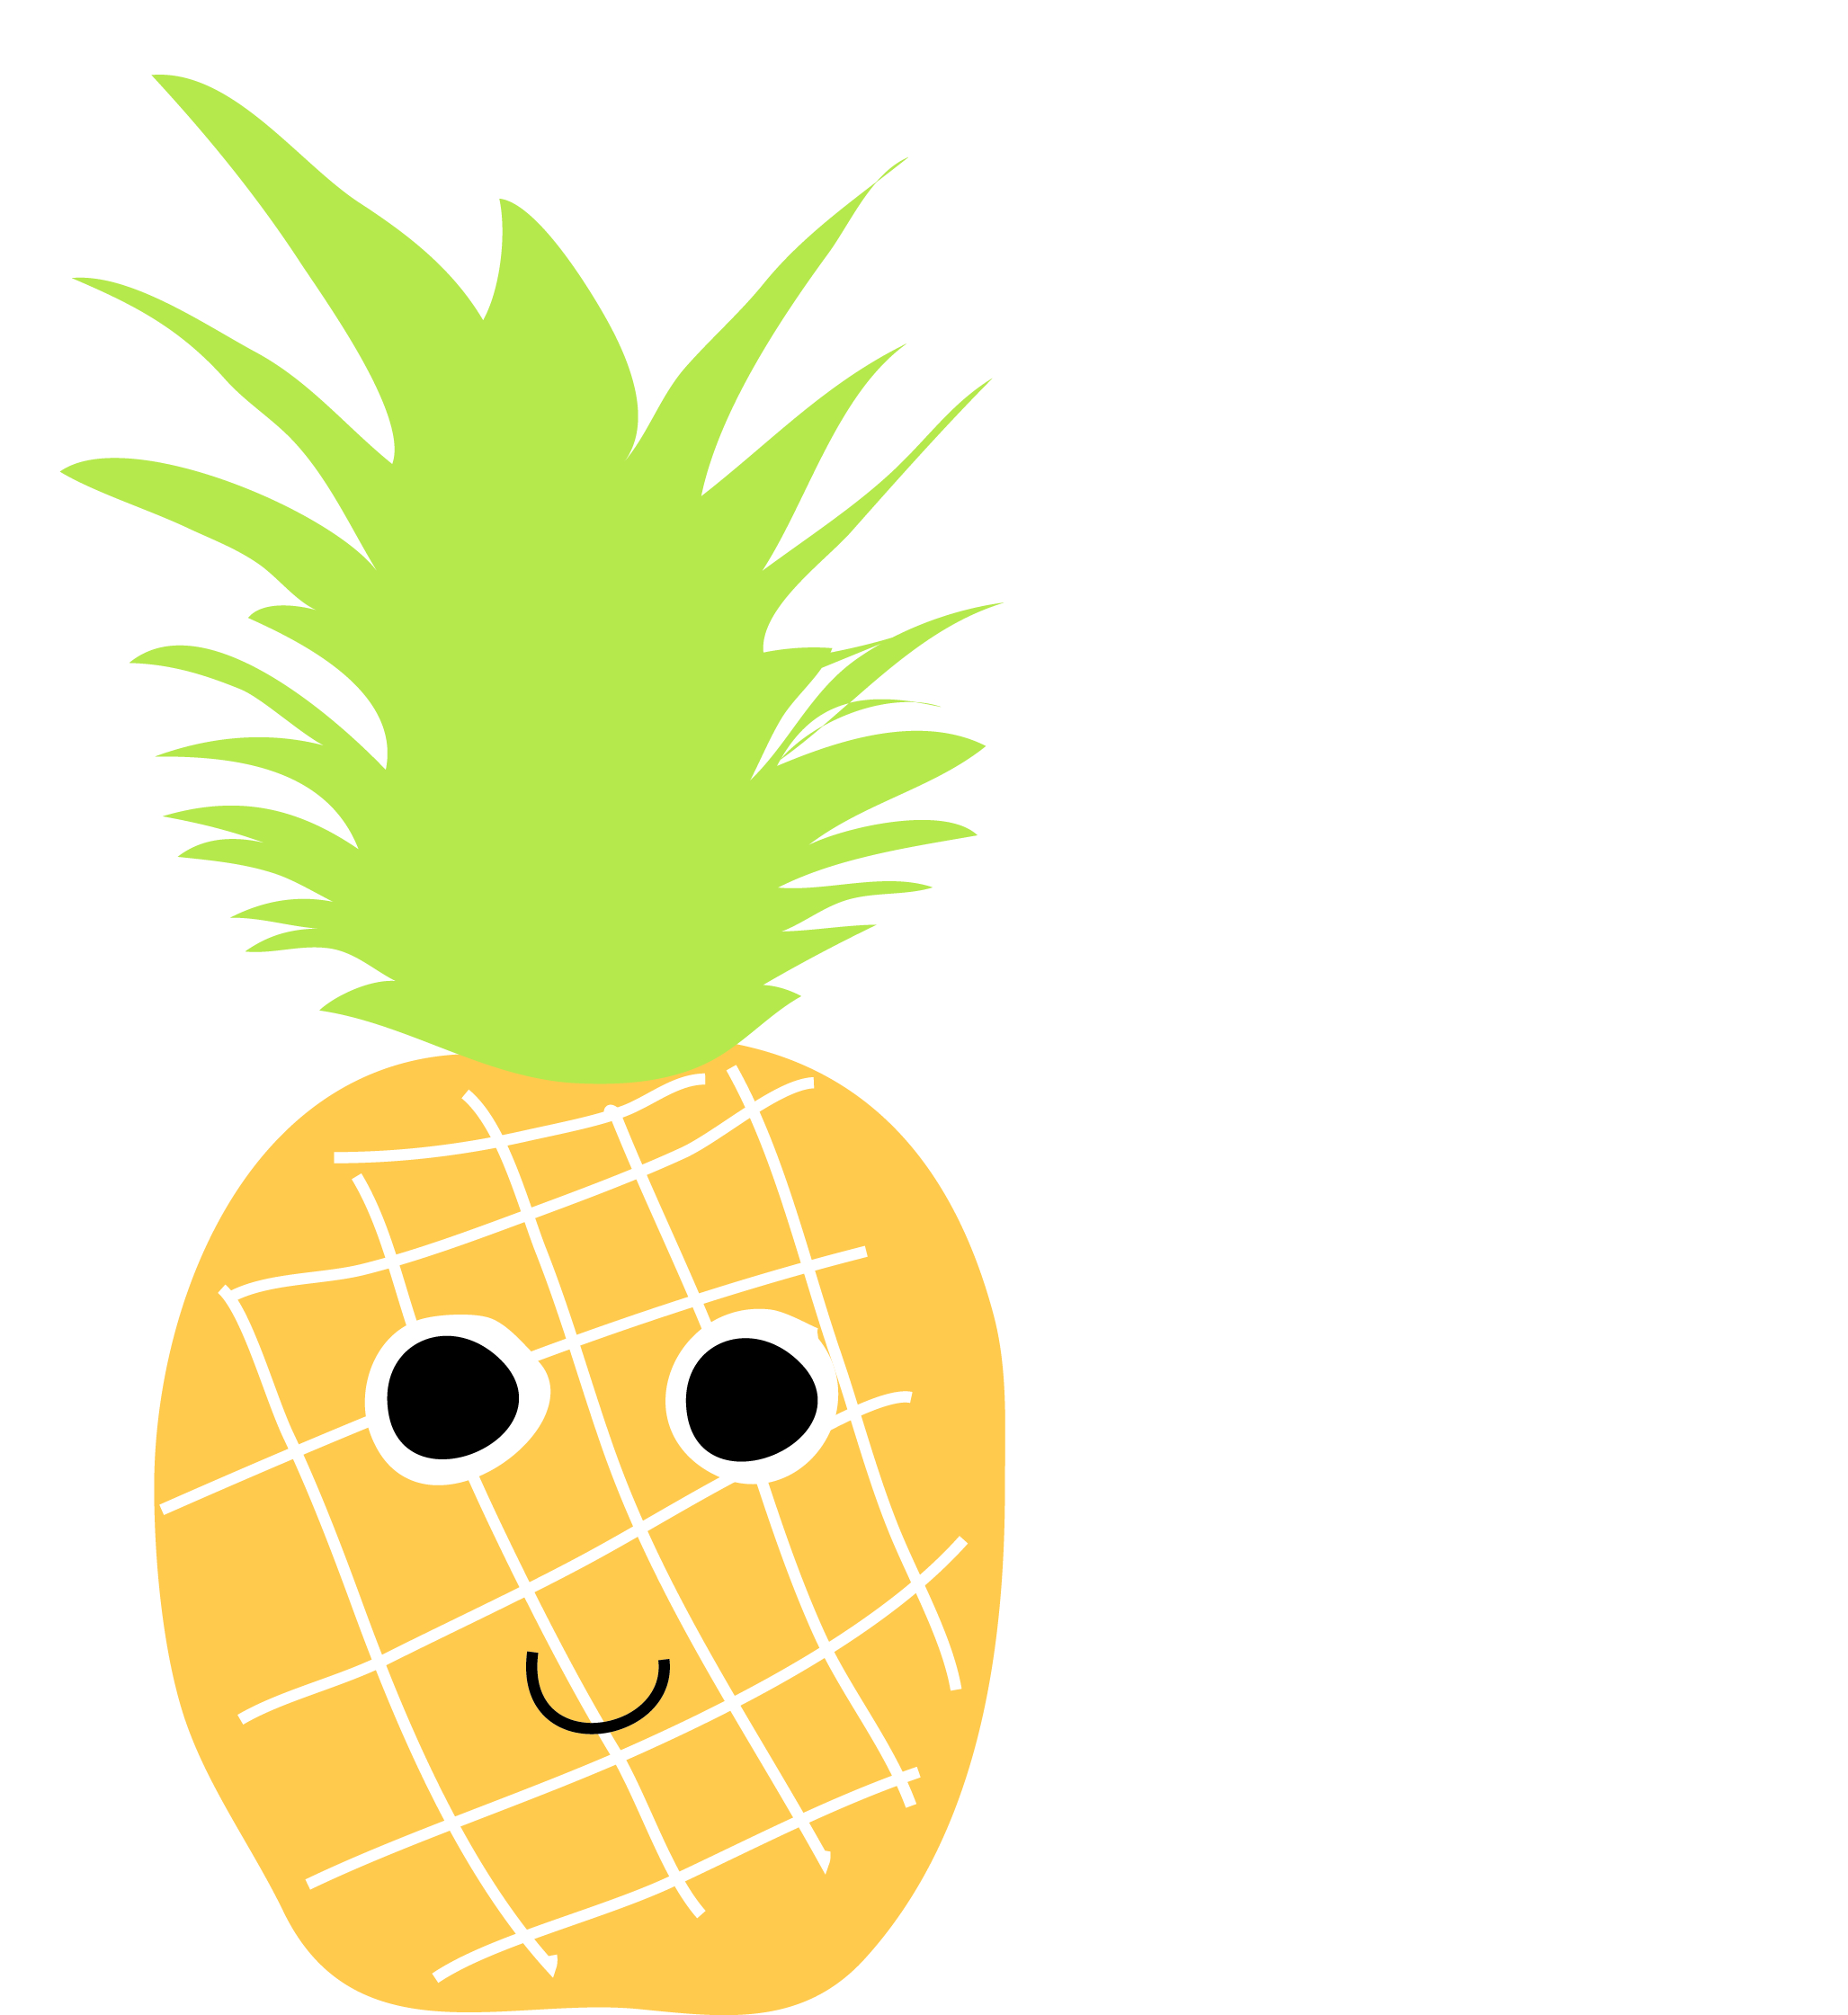 Pineapple Stencil | Clipart Panda - Free Clipart Images